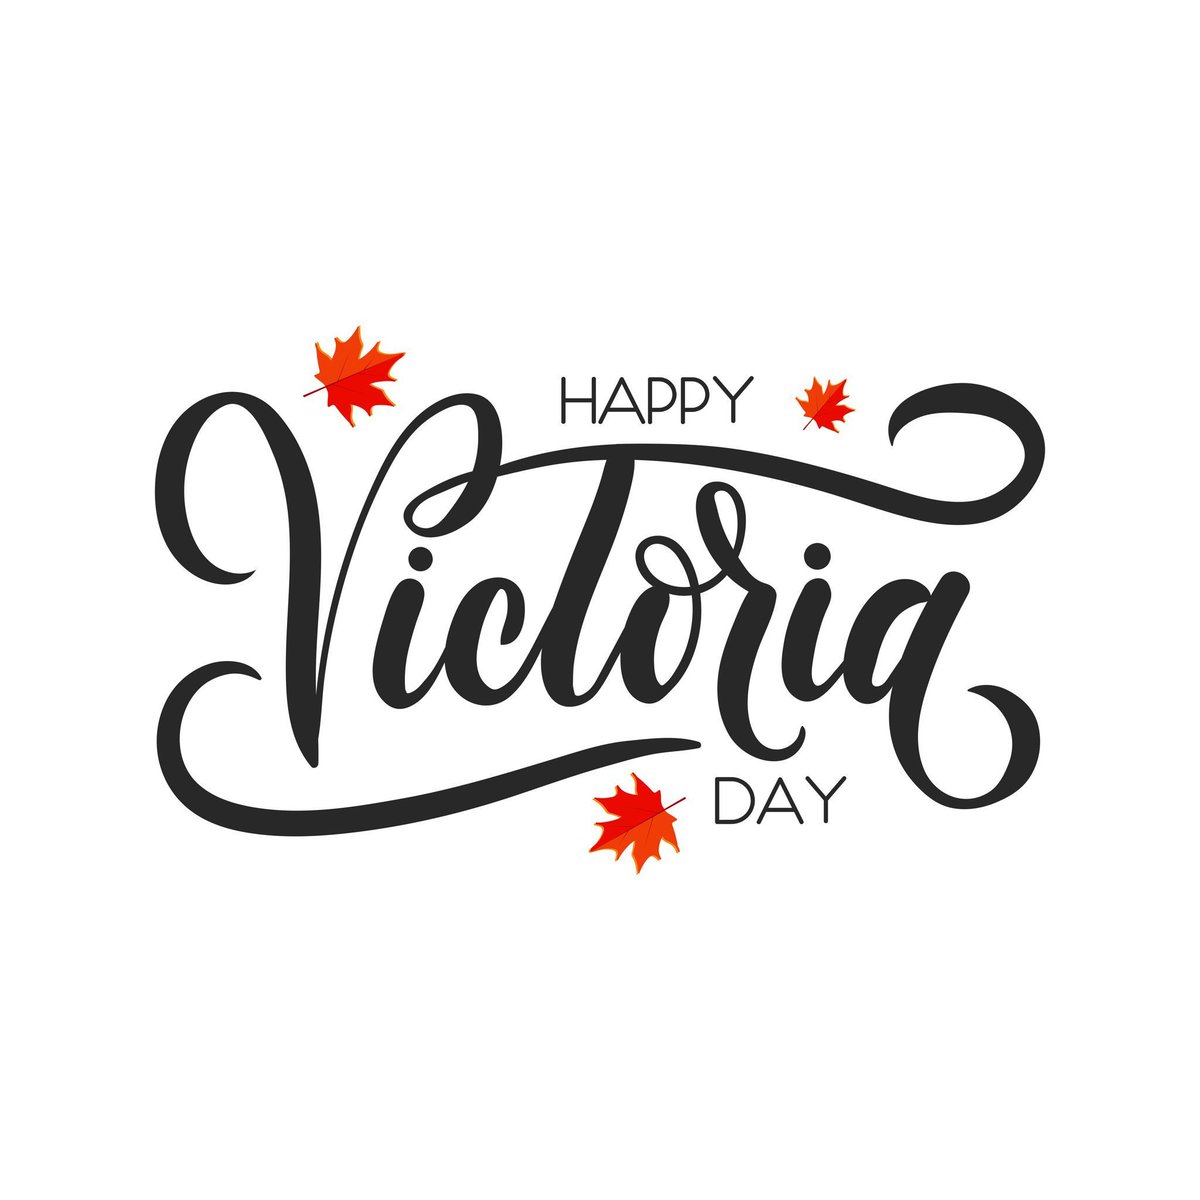 Langley Education Centre wishes you a Happy Victoria Day! Classes will not be in session today and the office will not be open. @langleyschools @sd35careered @sd35aviation #mysd35community #think35